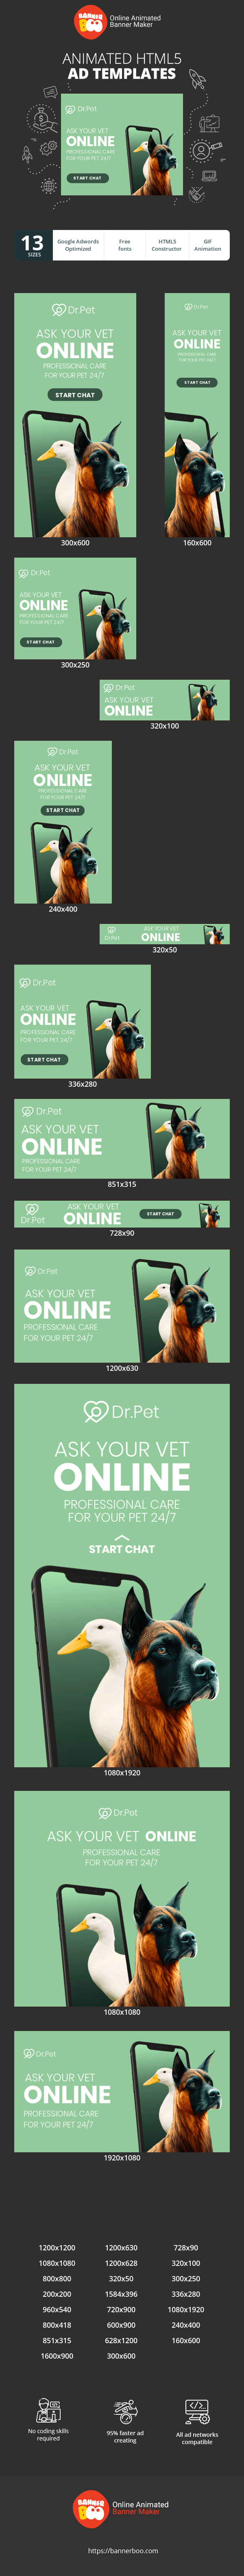 Banner ad template — Ask Your Vet Online — Professional Care For Your Pet 24/7